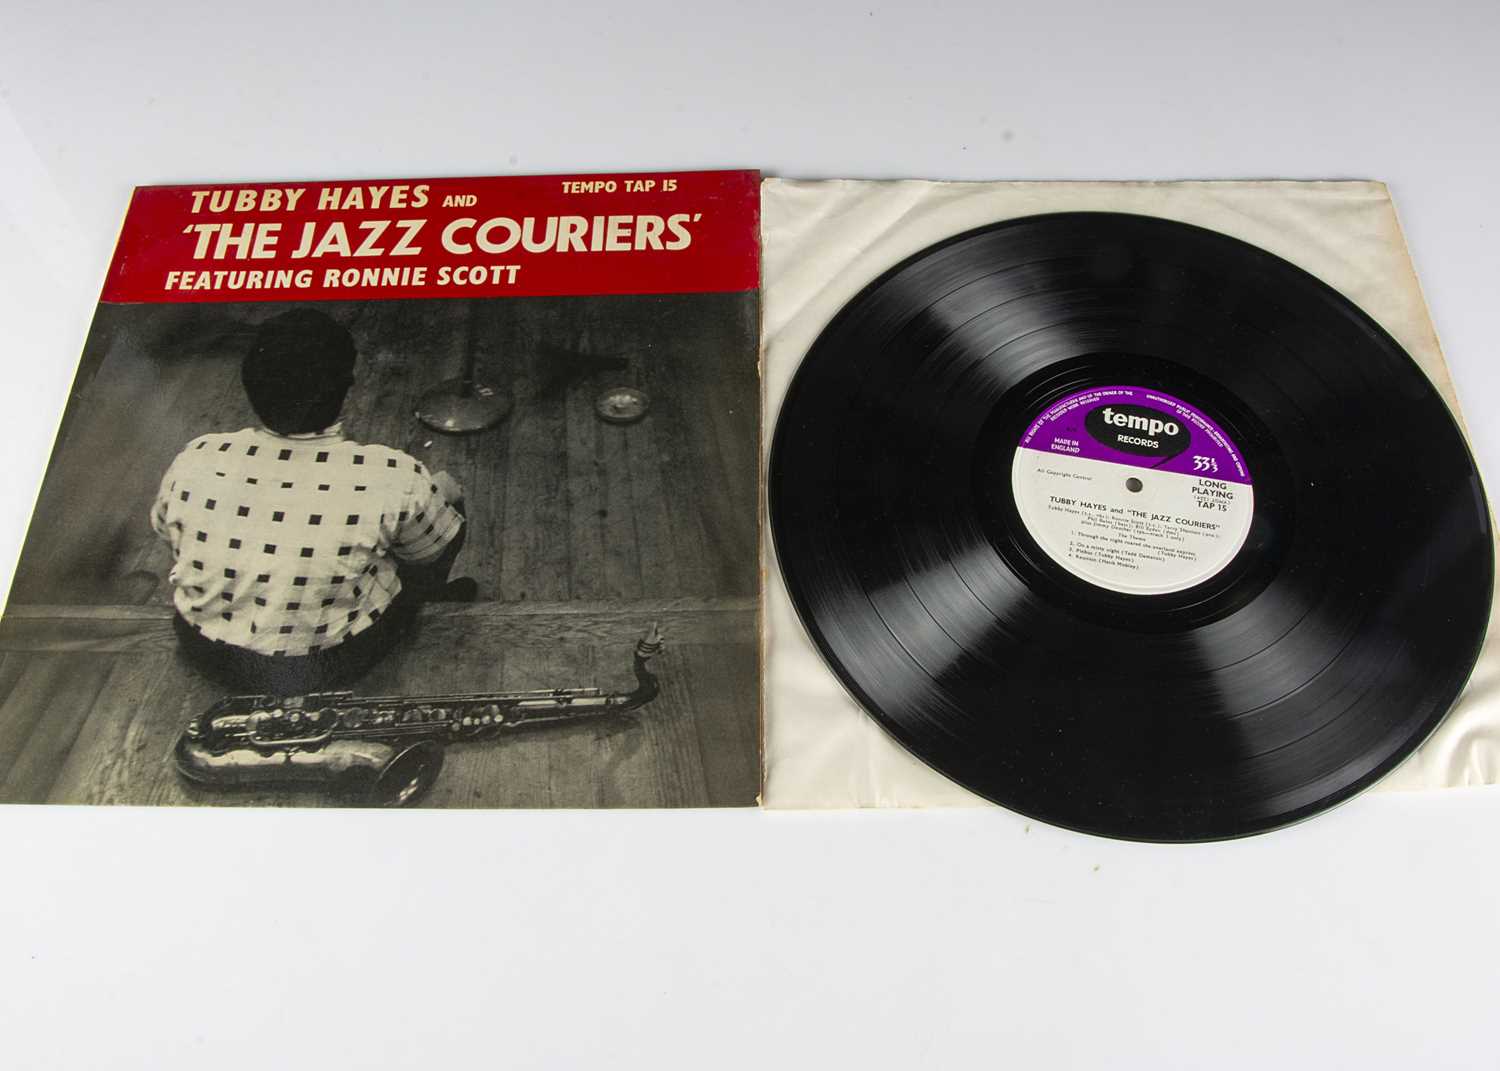 Lot 8 - Tubby Hayes LP